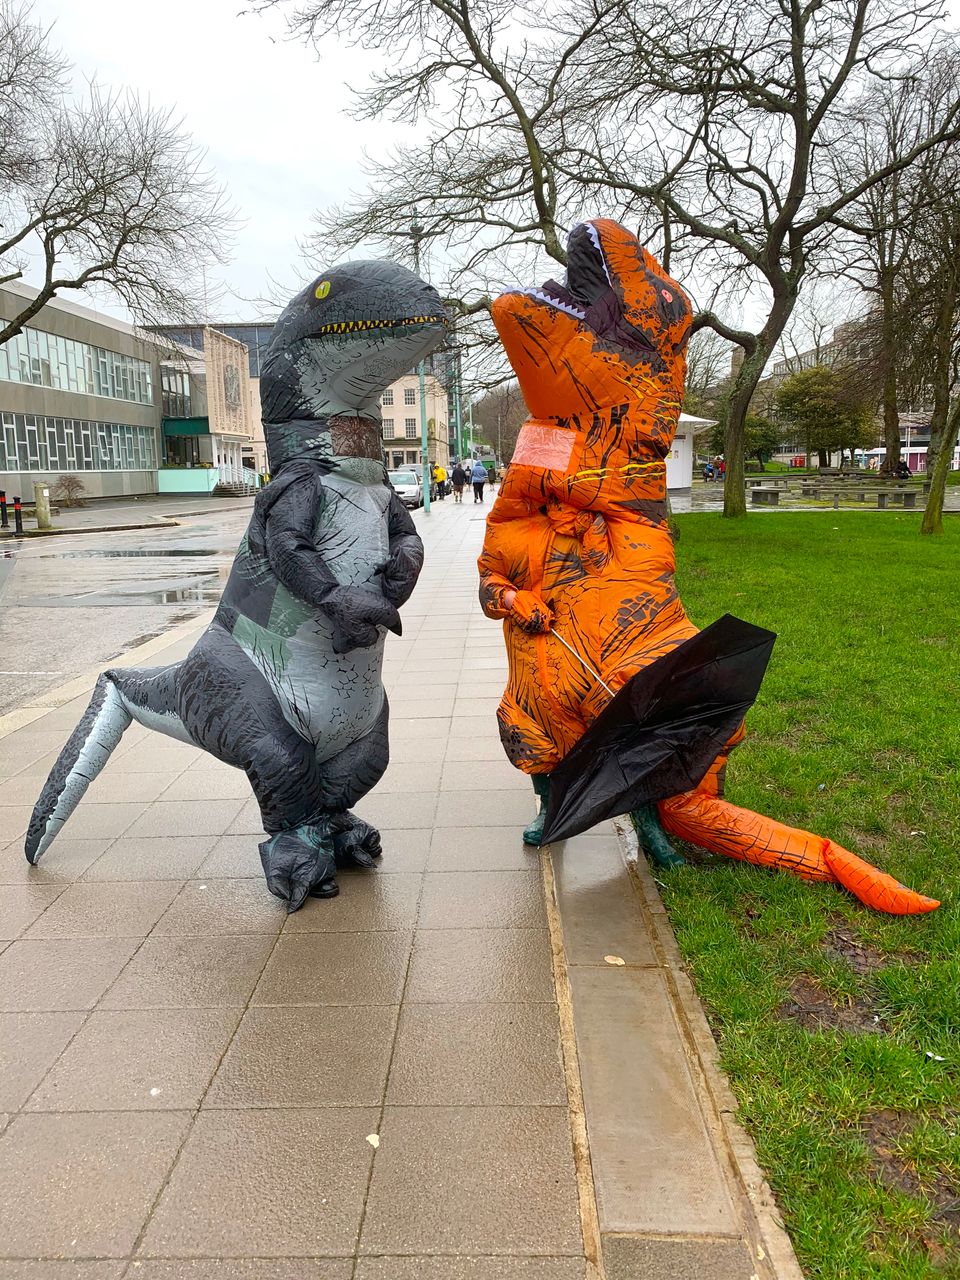 The Dinosaur Dress-Up Trend Is Spreading. Here's How It Started | HuffPost  UK Life